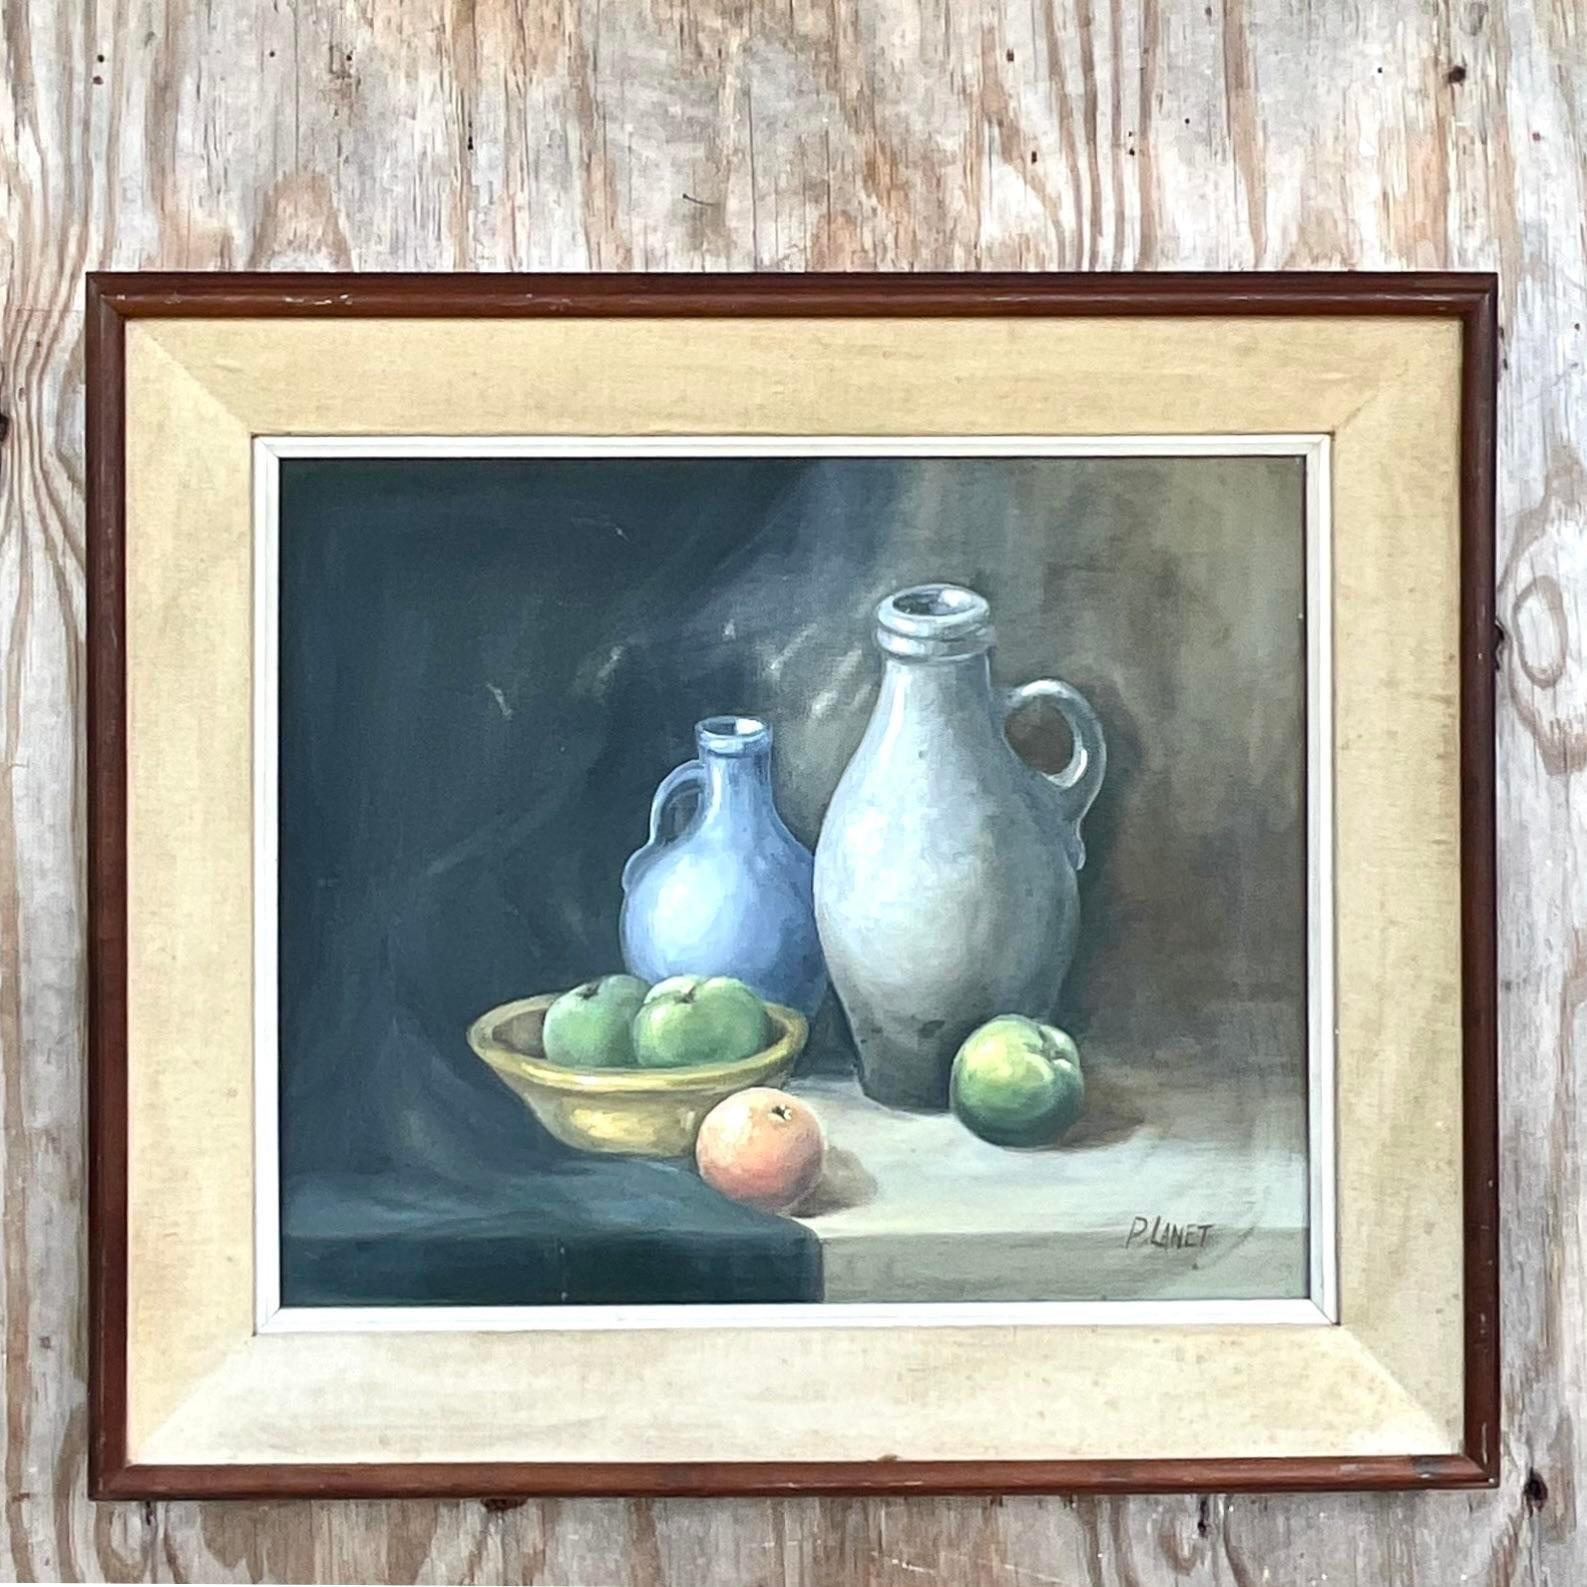 A fabulous vintage Boho original oil painting. A chic still life of fruit with pottery. A very zen composition in cool clear colors. Signed by the artist. Acquired from a Palm Beach estate